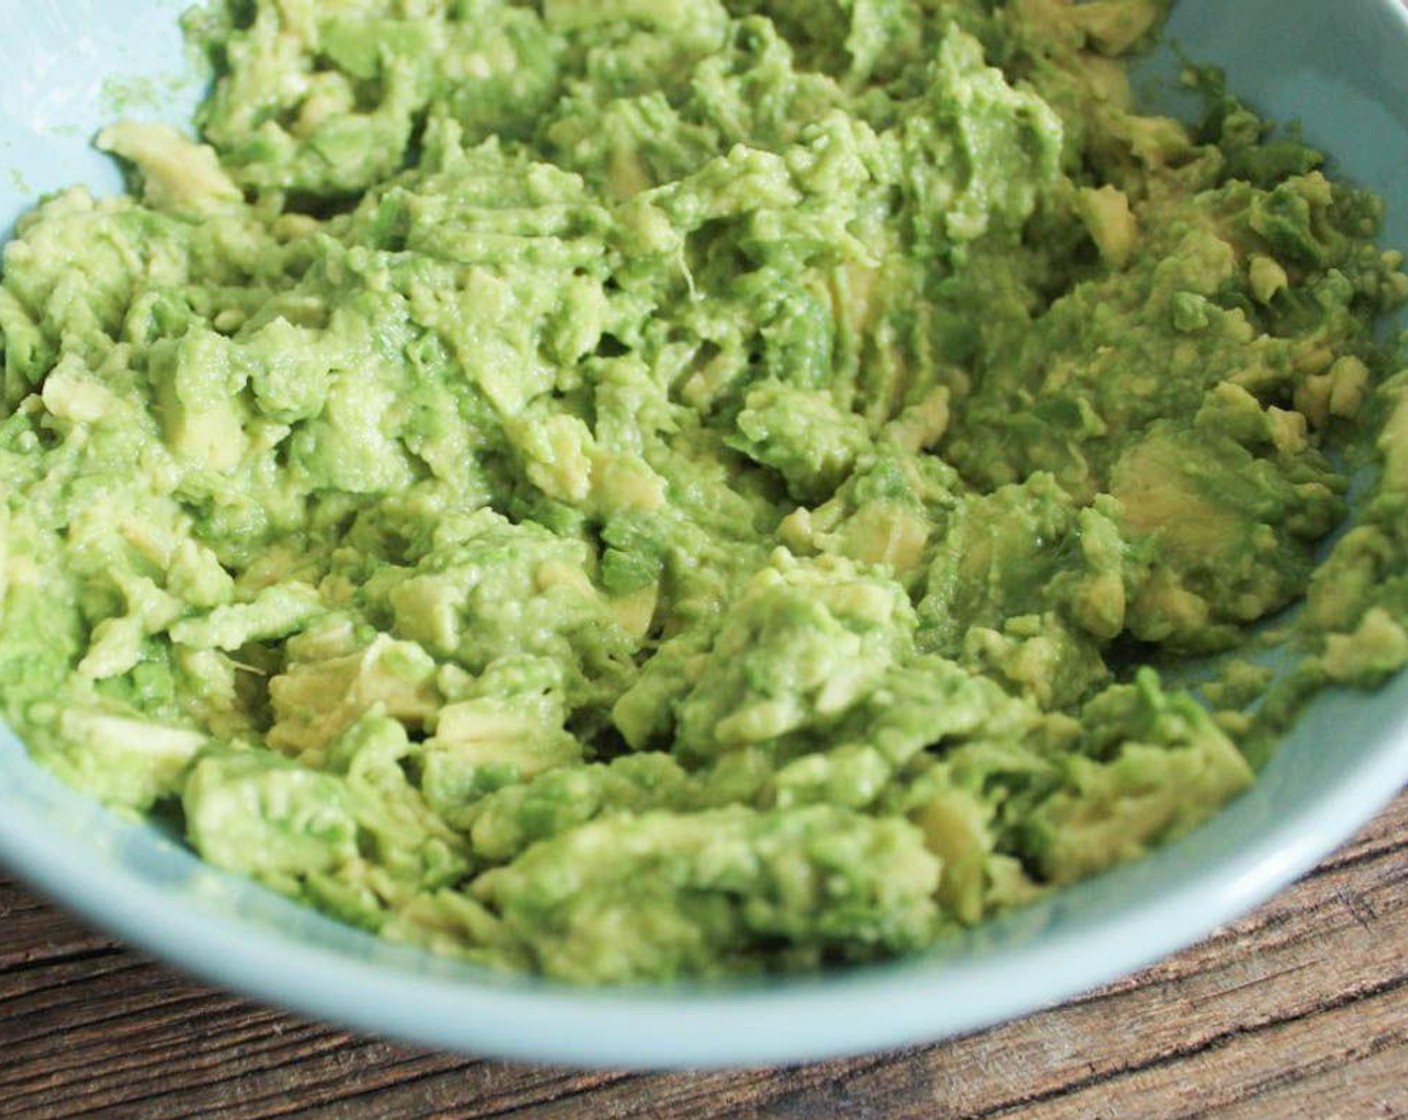 step 4 While the potatoes are baking, prepare the guacamole. In a medium bowl, mash the Avocados (1 1/2) with a fork until almost smooth (a few chunks are okay).